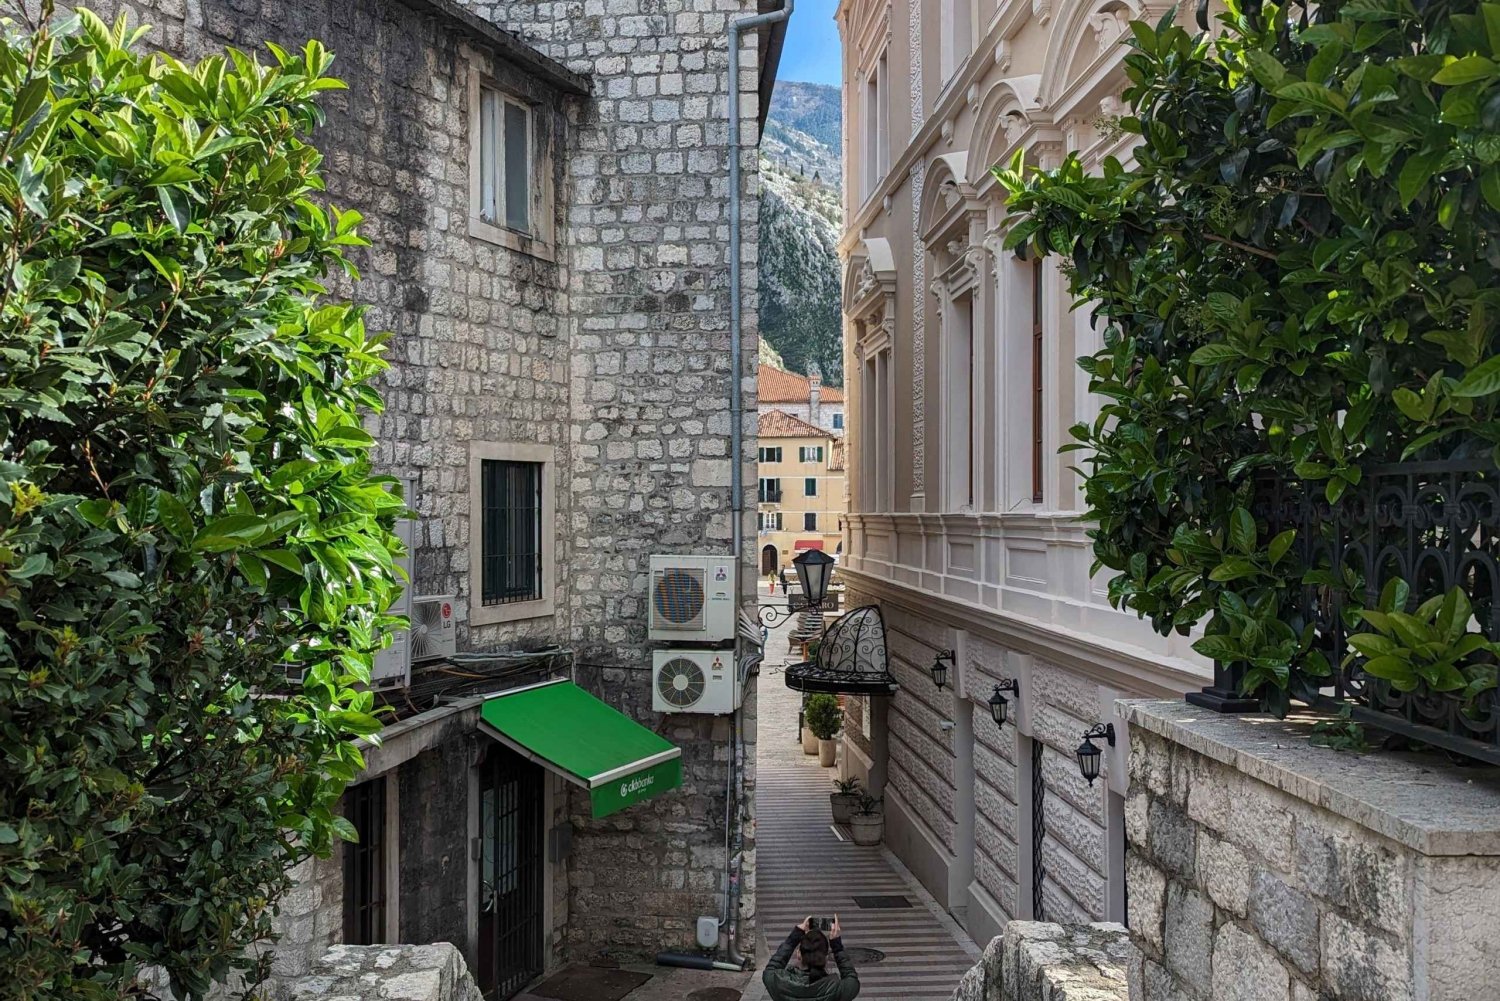 From Dubrovnik: Experience the Montenegro